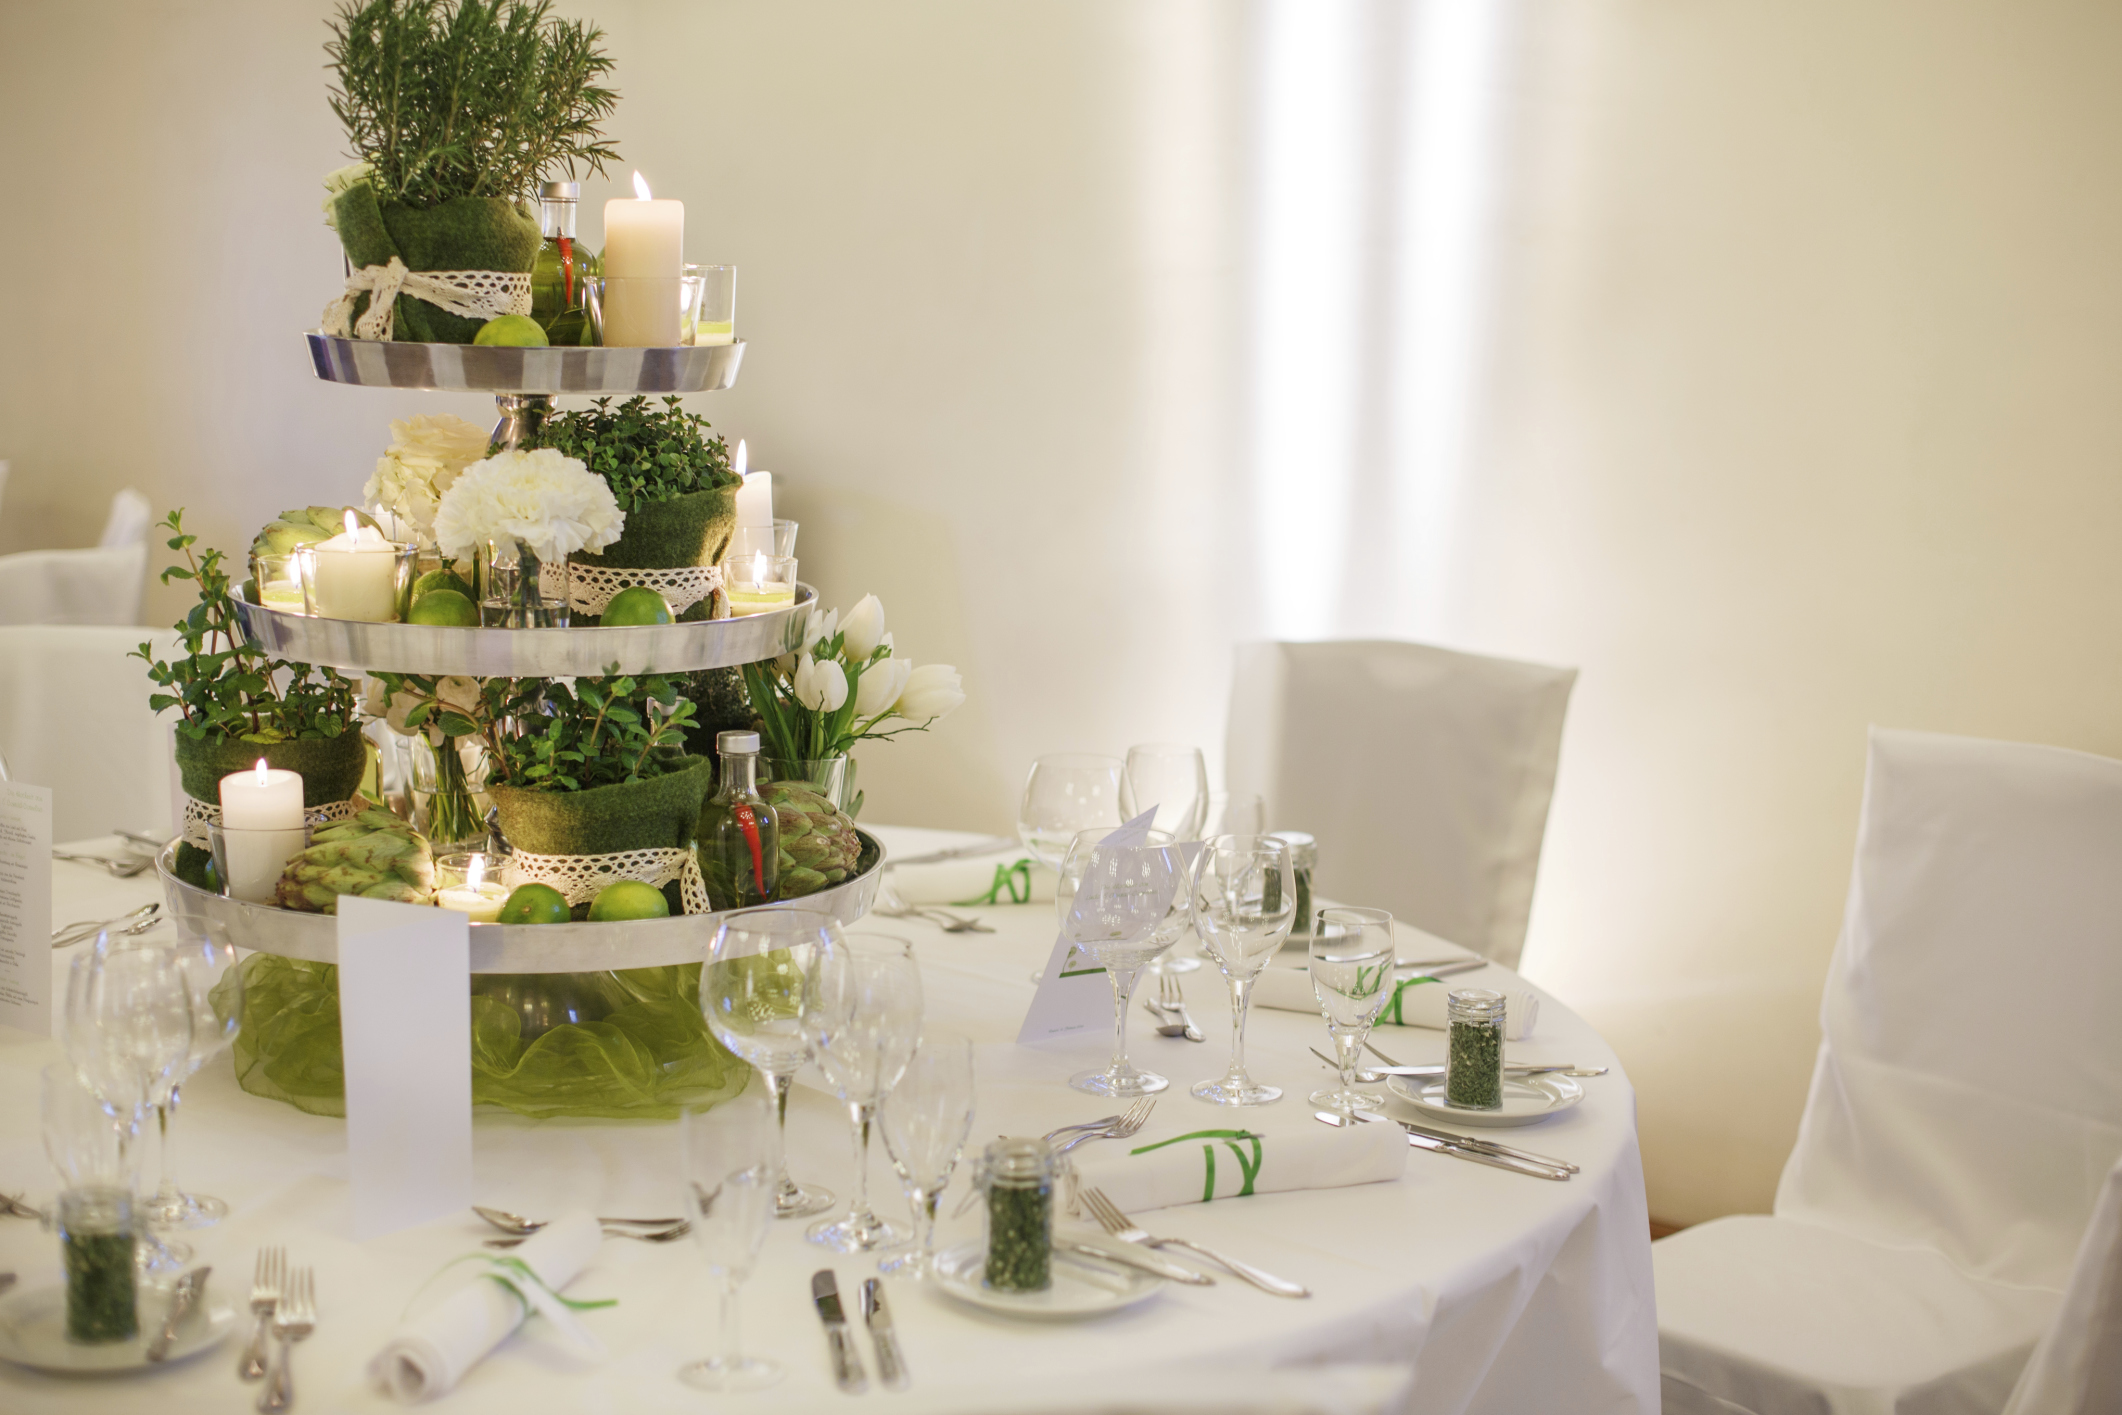 Four ideas for wedding table decorations | Easy Weddings UK